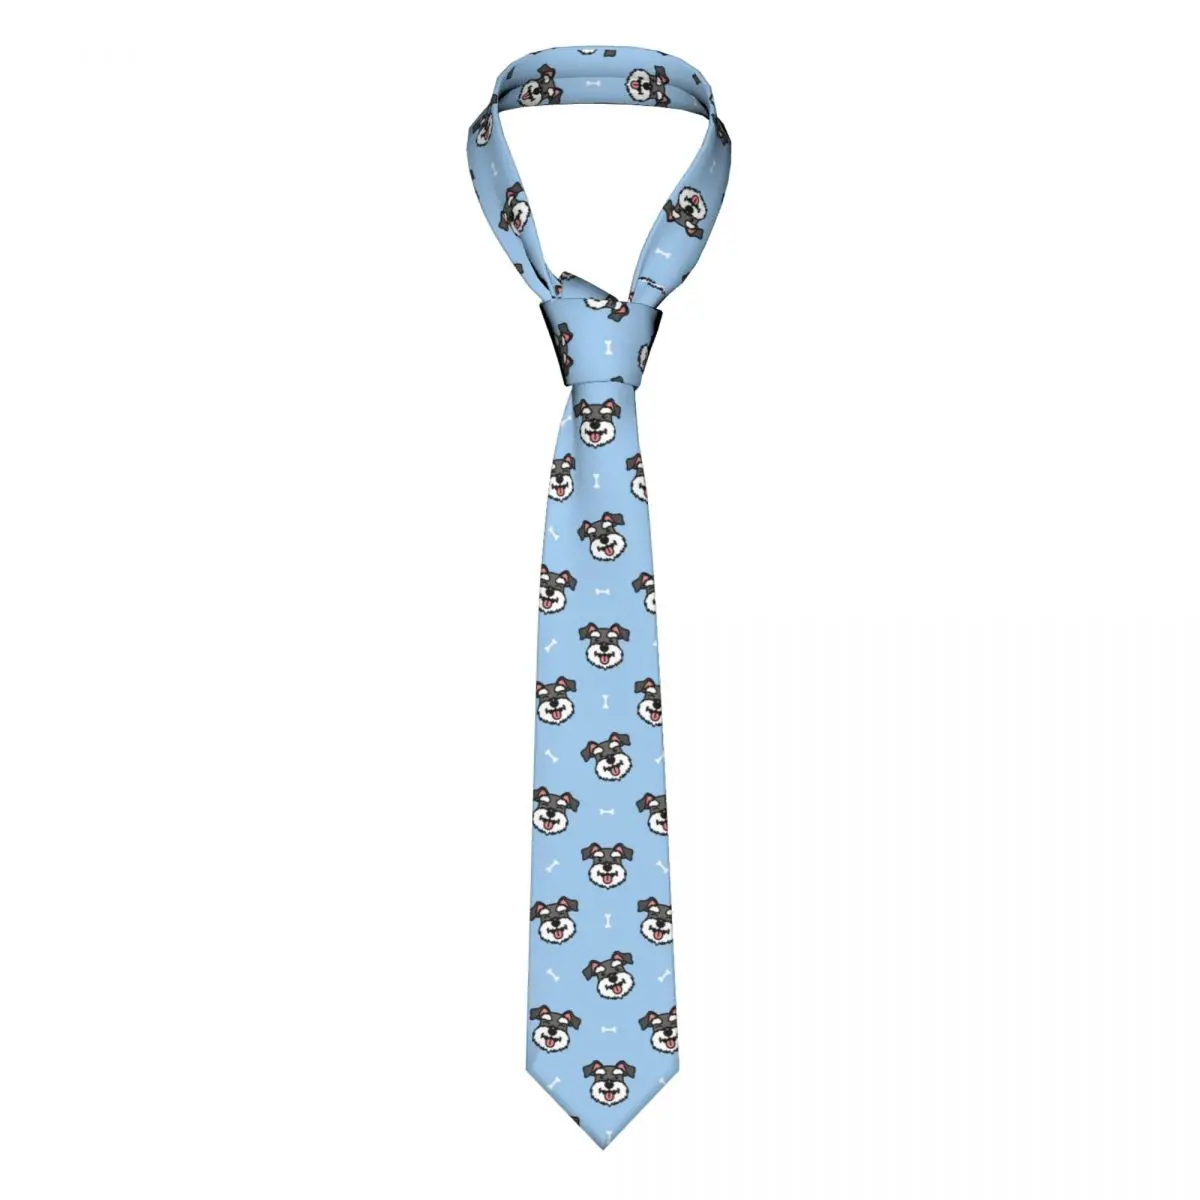 

Cute Schnauzer Dog Unisex Neckties Polyester 8 cm Gift for Animal Dog Lover Neck Ties for Men Suits Accessories Cravat Business